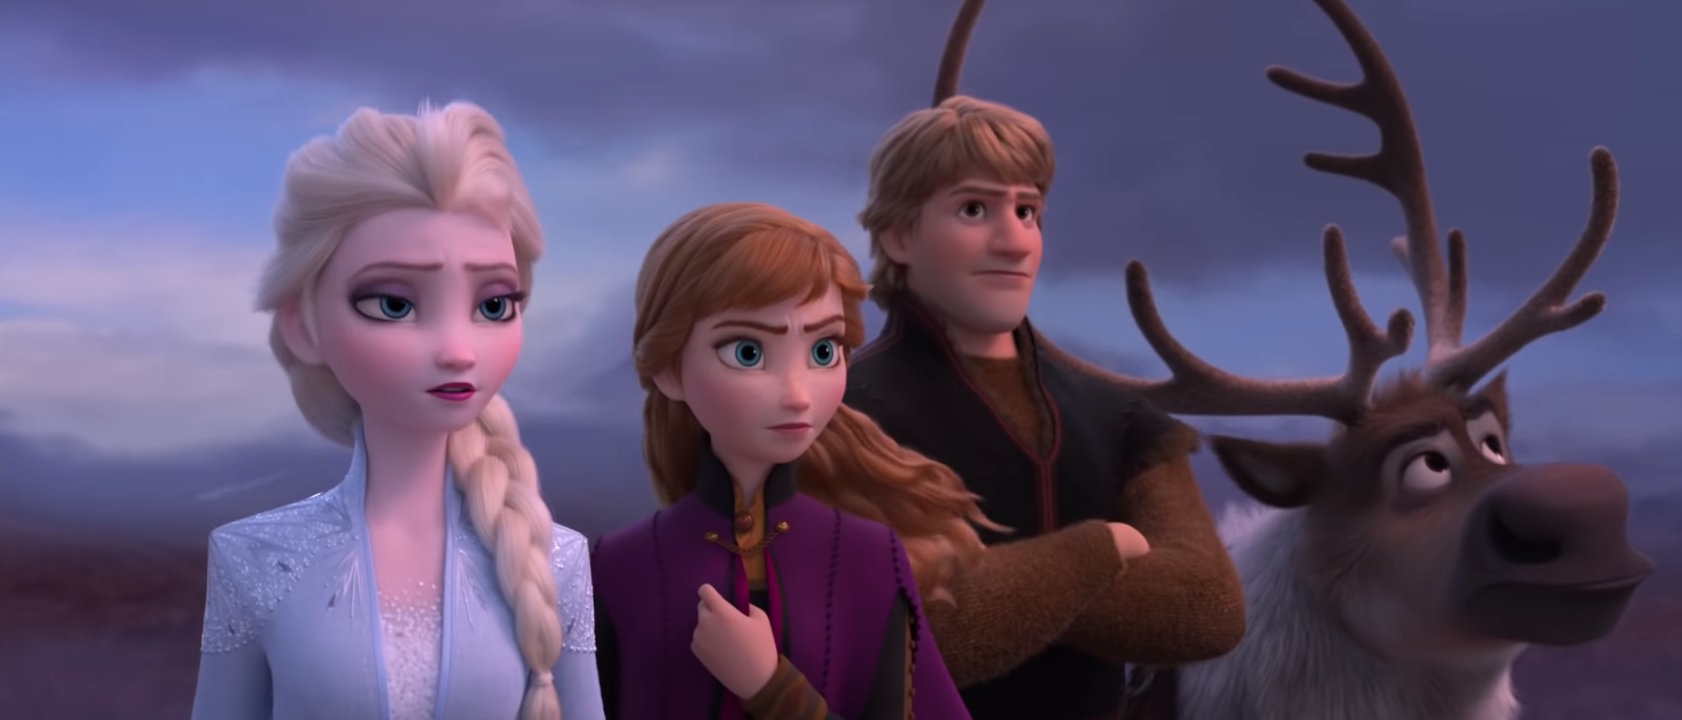 Marc Smith elucidates making of Frozen 3, know more on possible plot!